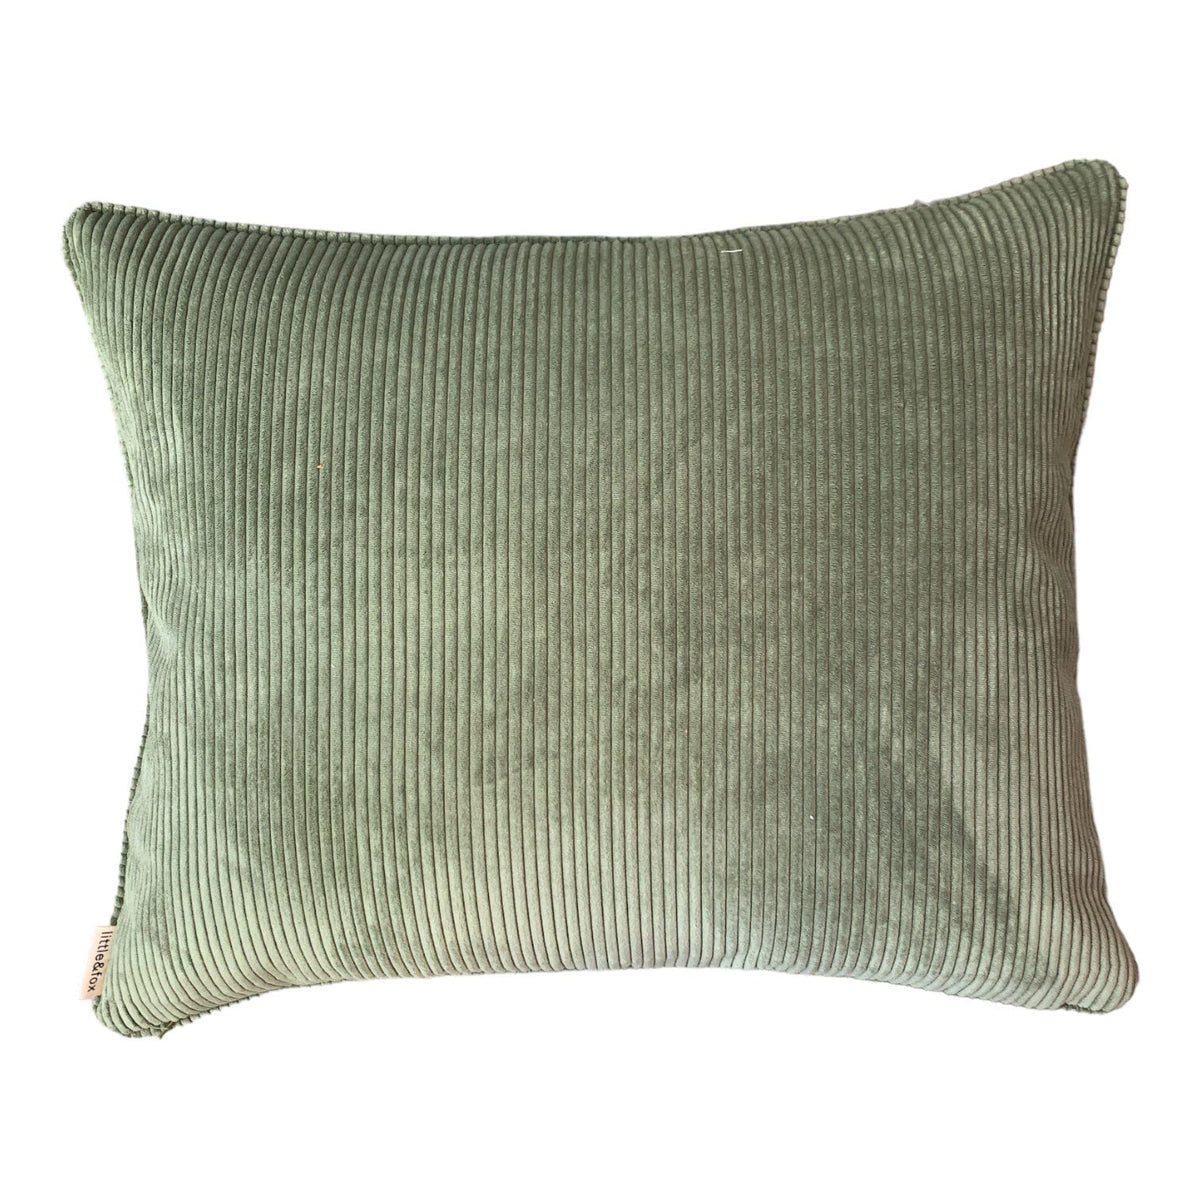 Darven Olive Piped 55x45cm Cushion little and fox.jpg